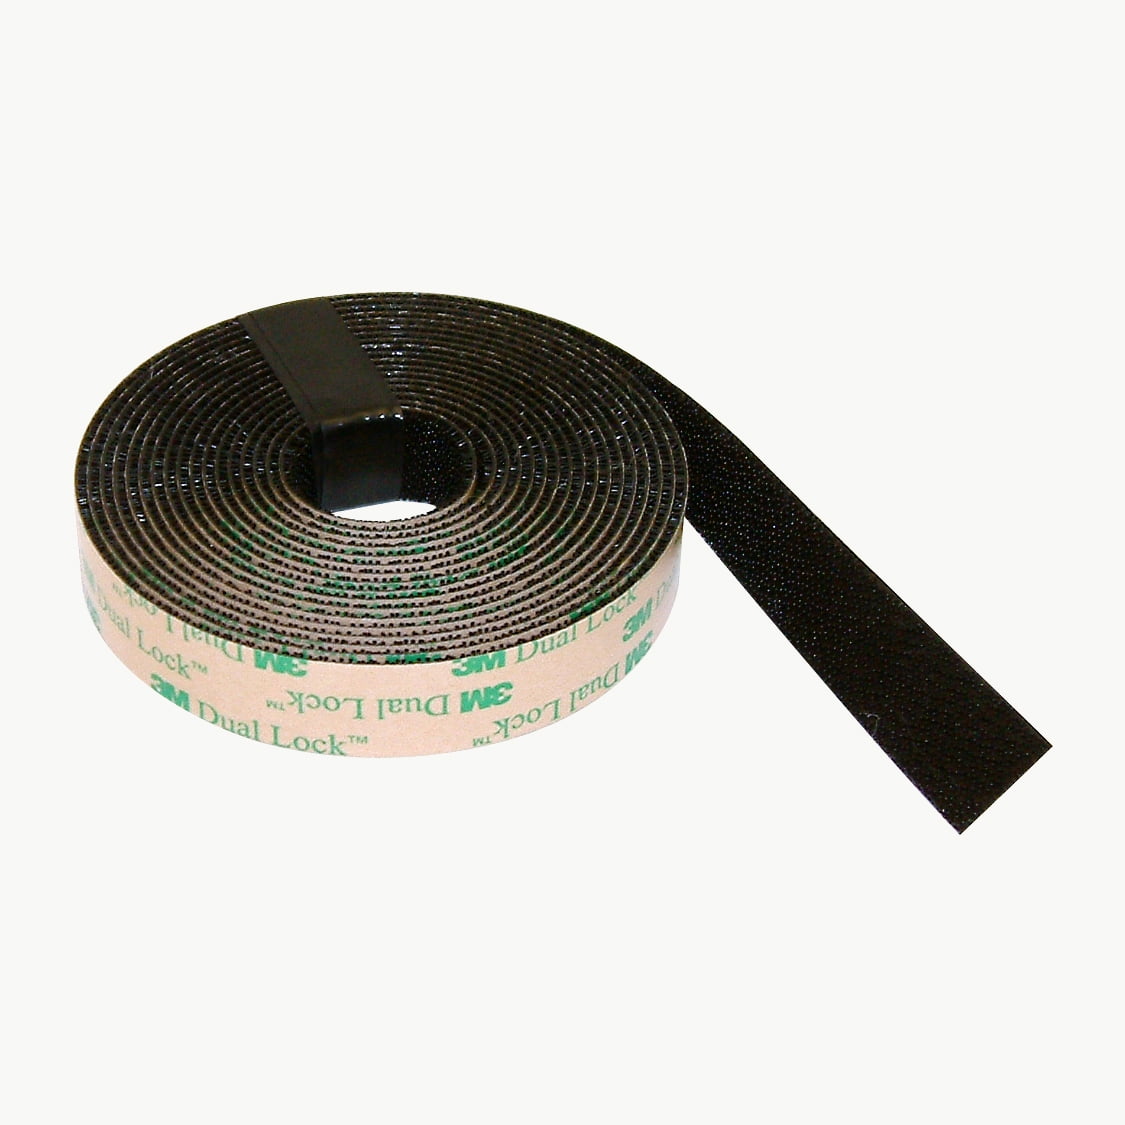 3M™ Dual Lock™ Reclosable Fastener TB4575, Black, 1 in x 10 ft, Mated  Strips - The Binding Source